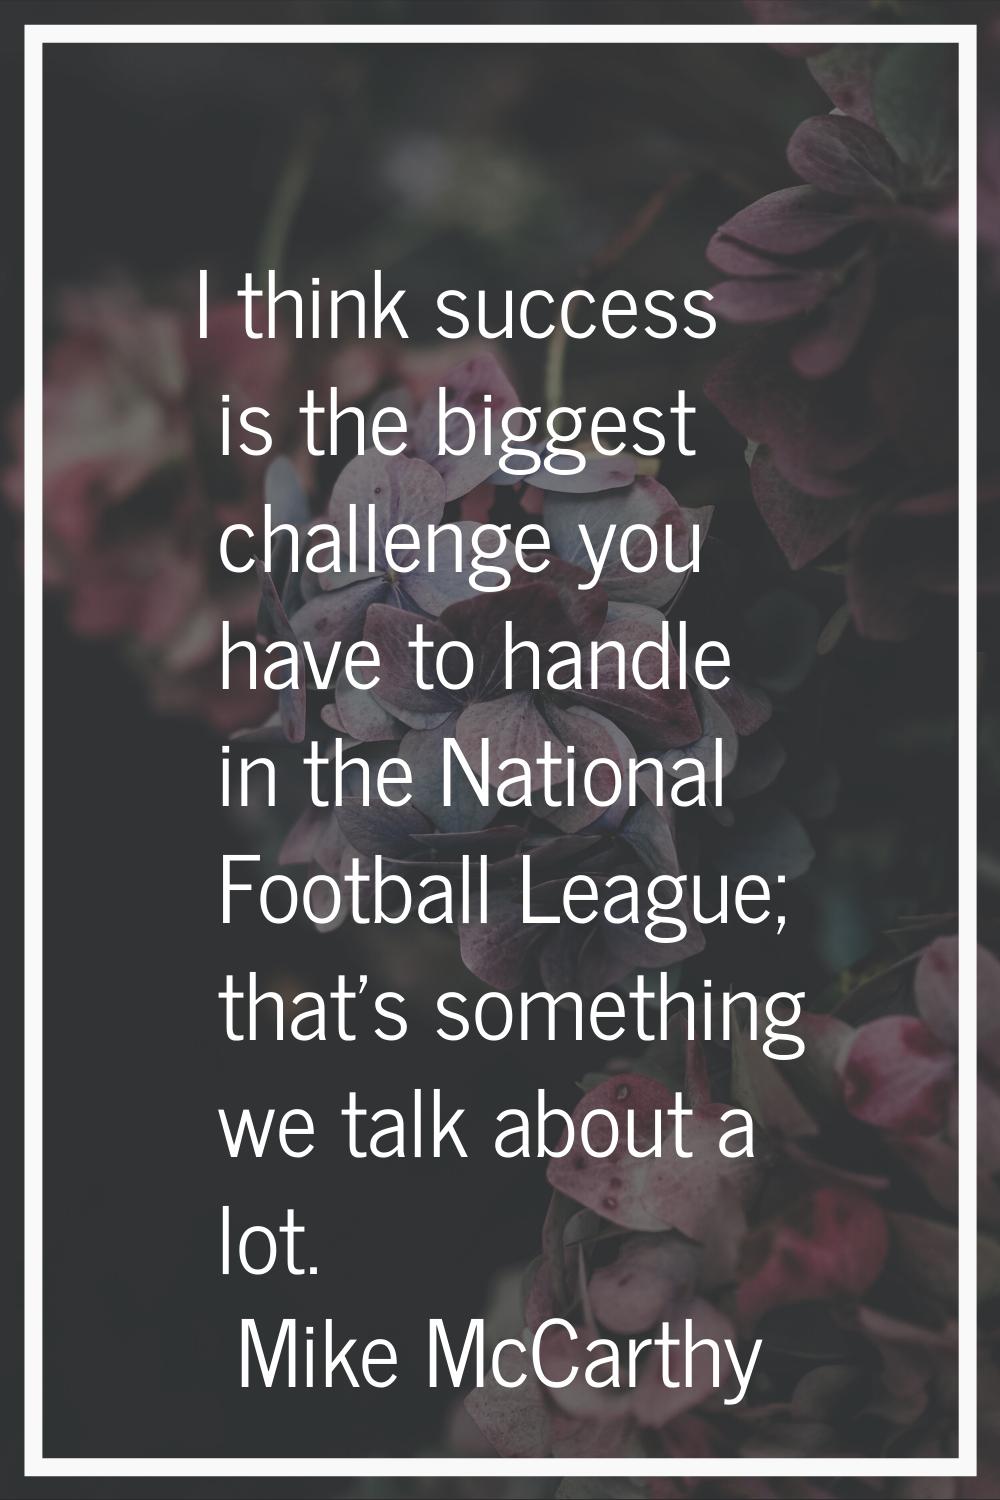 I think success is the biggest challenge you have to handle in the National Football League; that's